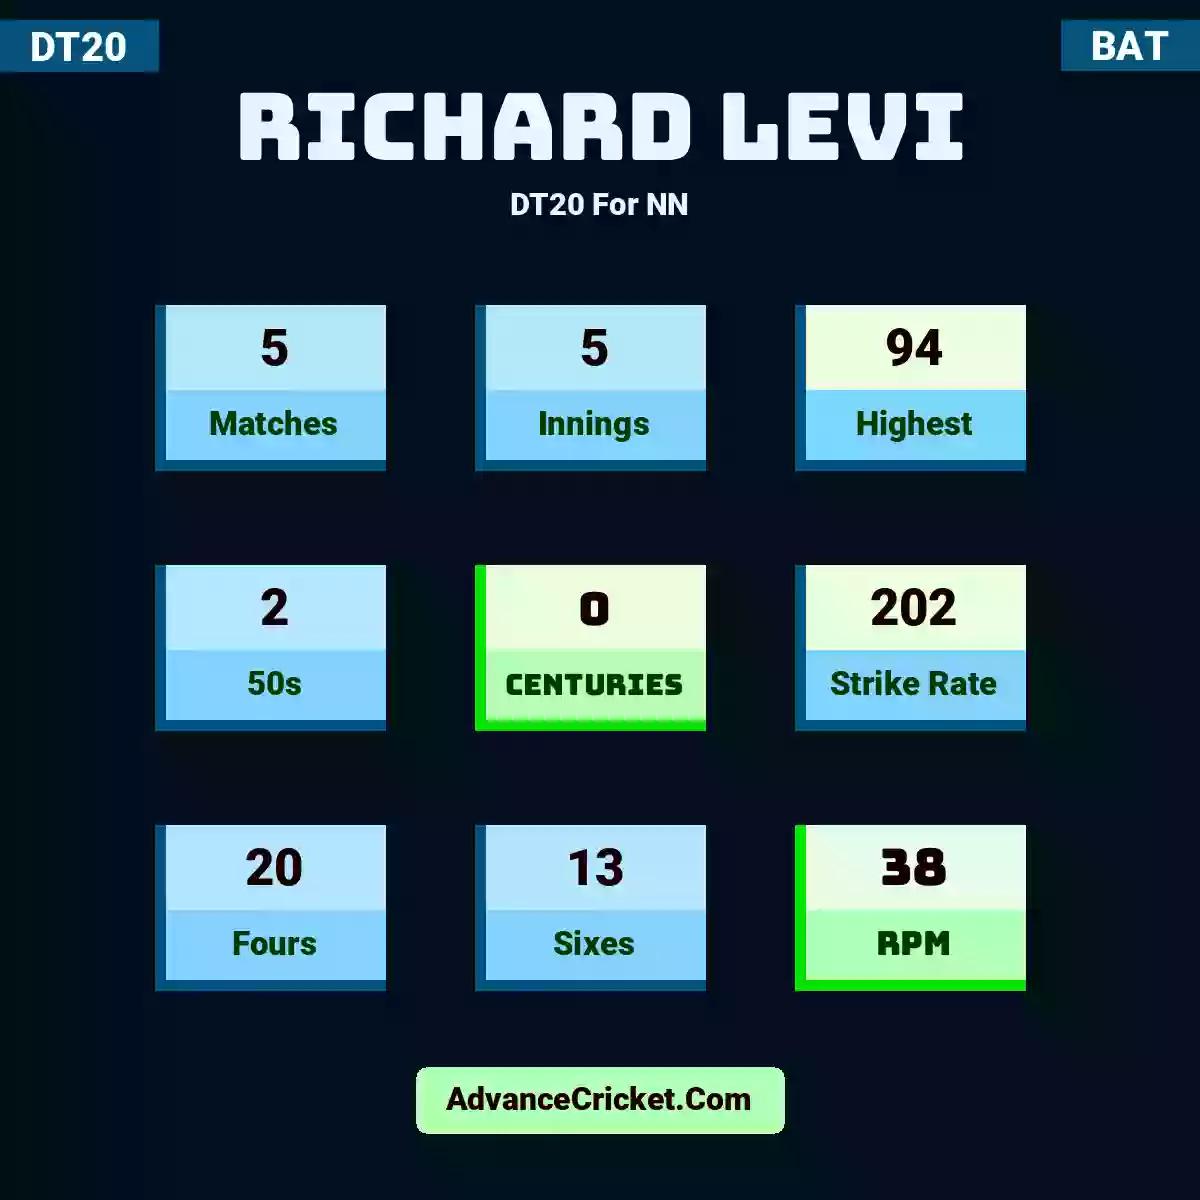 Richard Levi DT20  For NN, Richard Levi played 5 matches, scored 94 runs as highest, 2 half-centuries, and 0 centuries, with a strike rate of 202. R.Levi hit 20 fours and 13 sixes, with an RPM of 38.